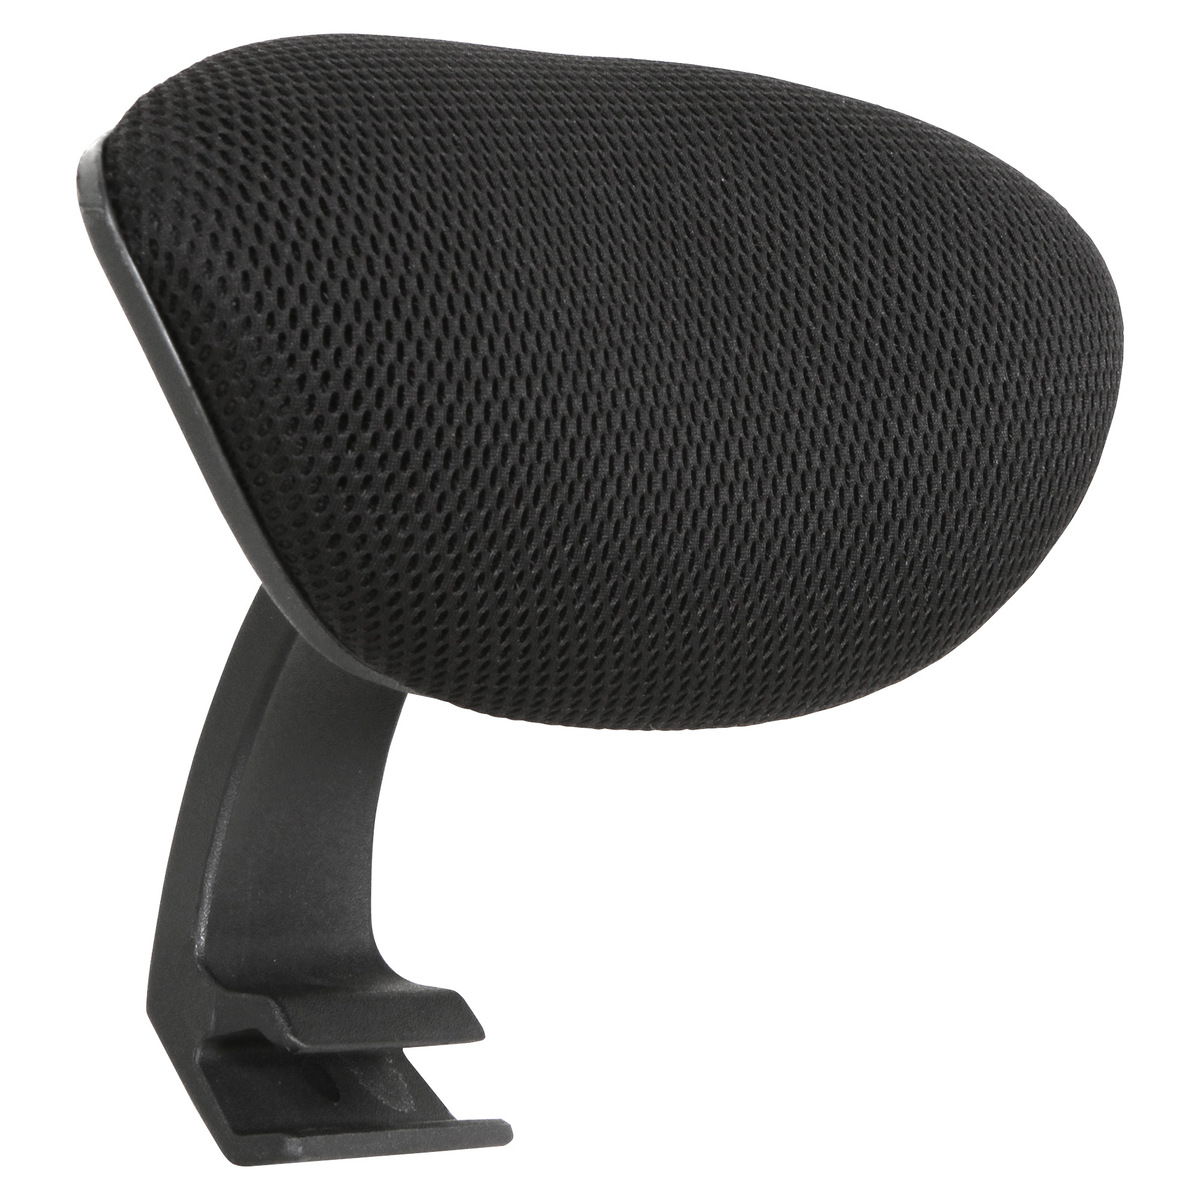 How To Add A Headrest To An Office Chair